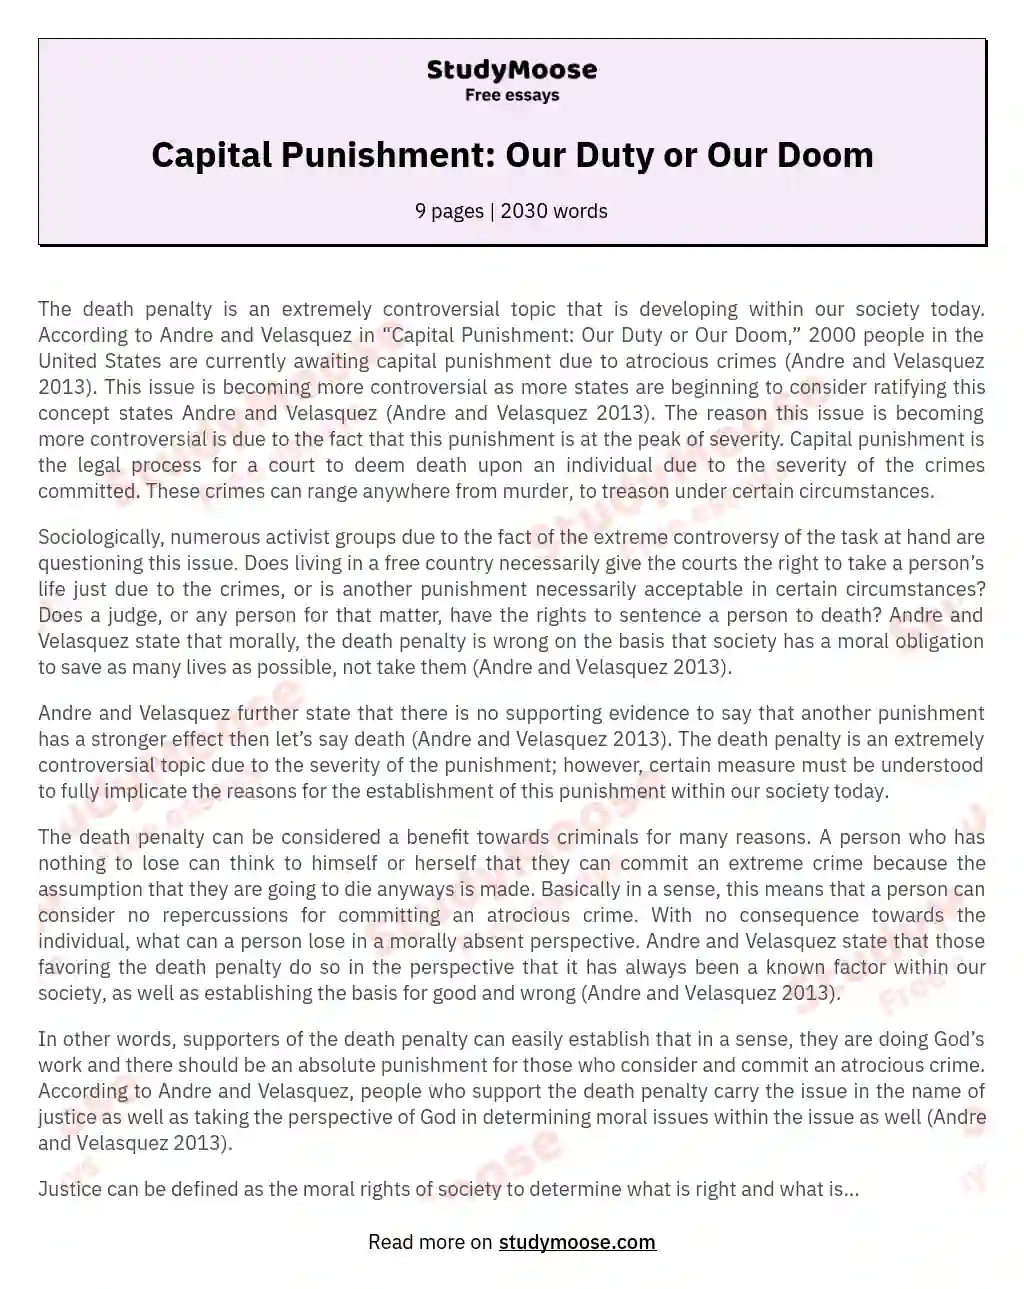 Capital Punishment: Our Duty or Our Doom